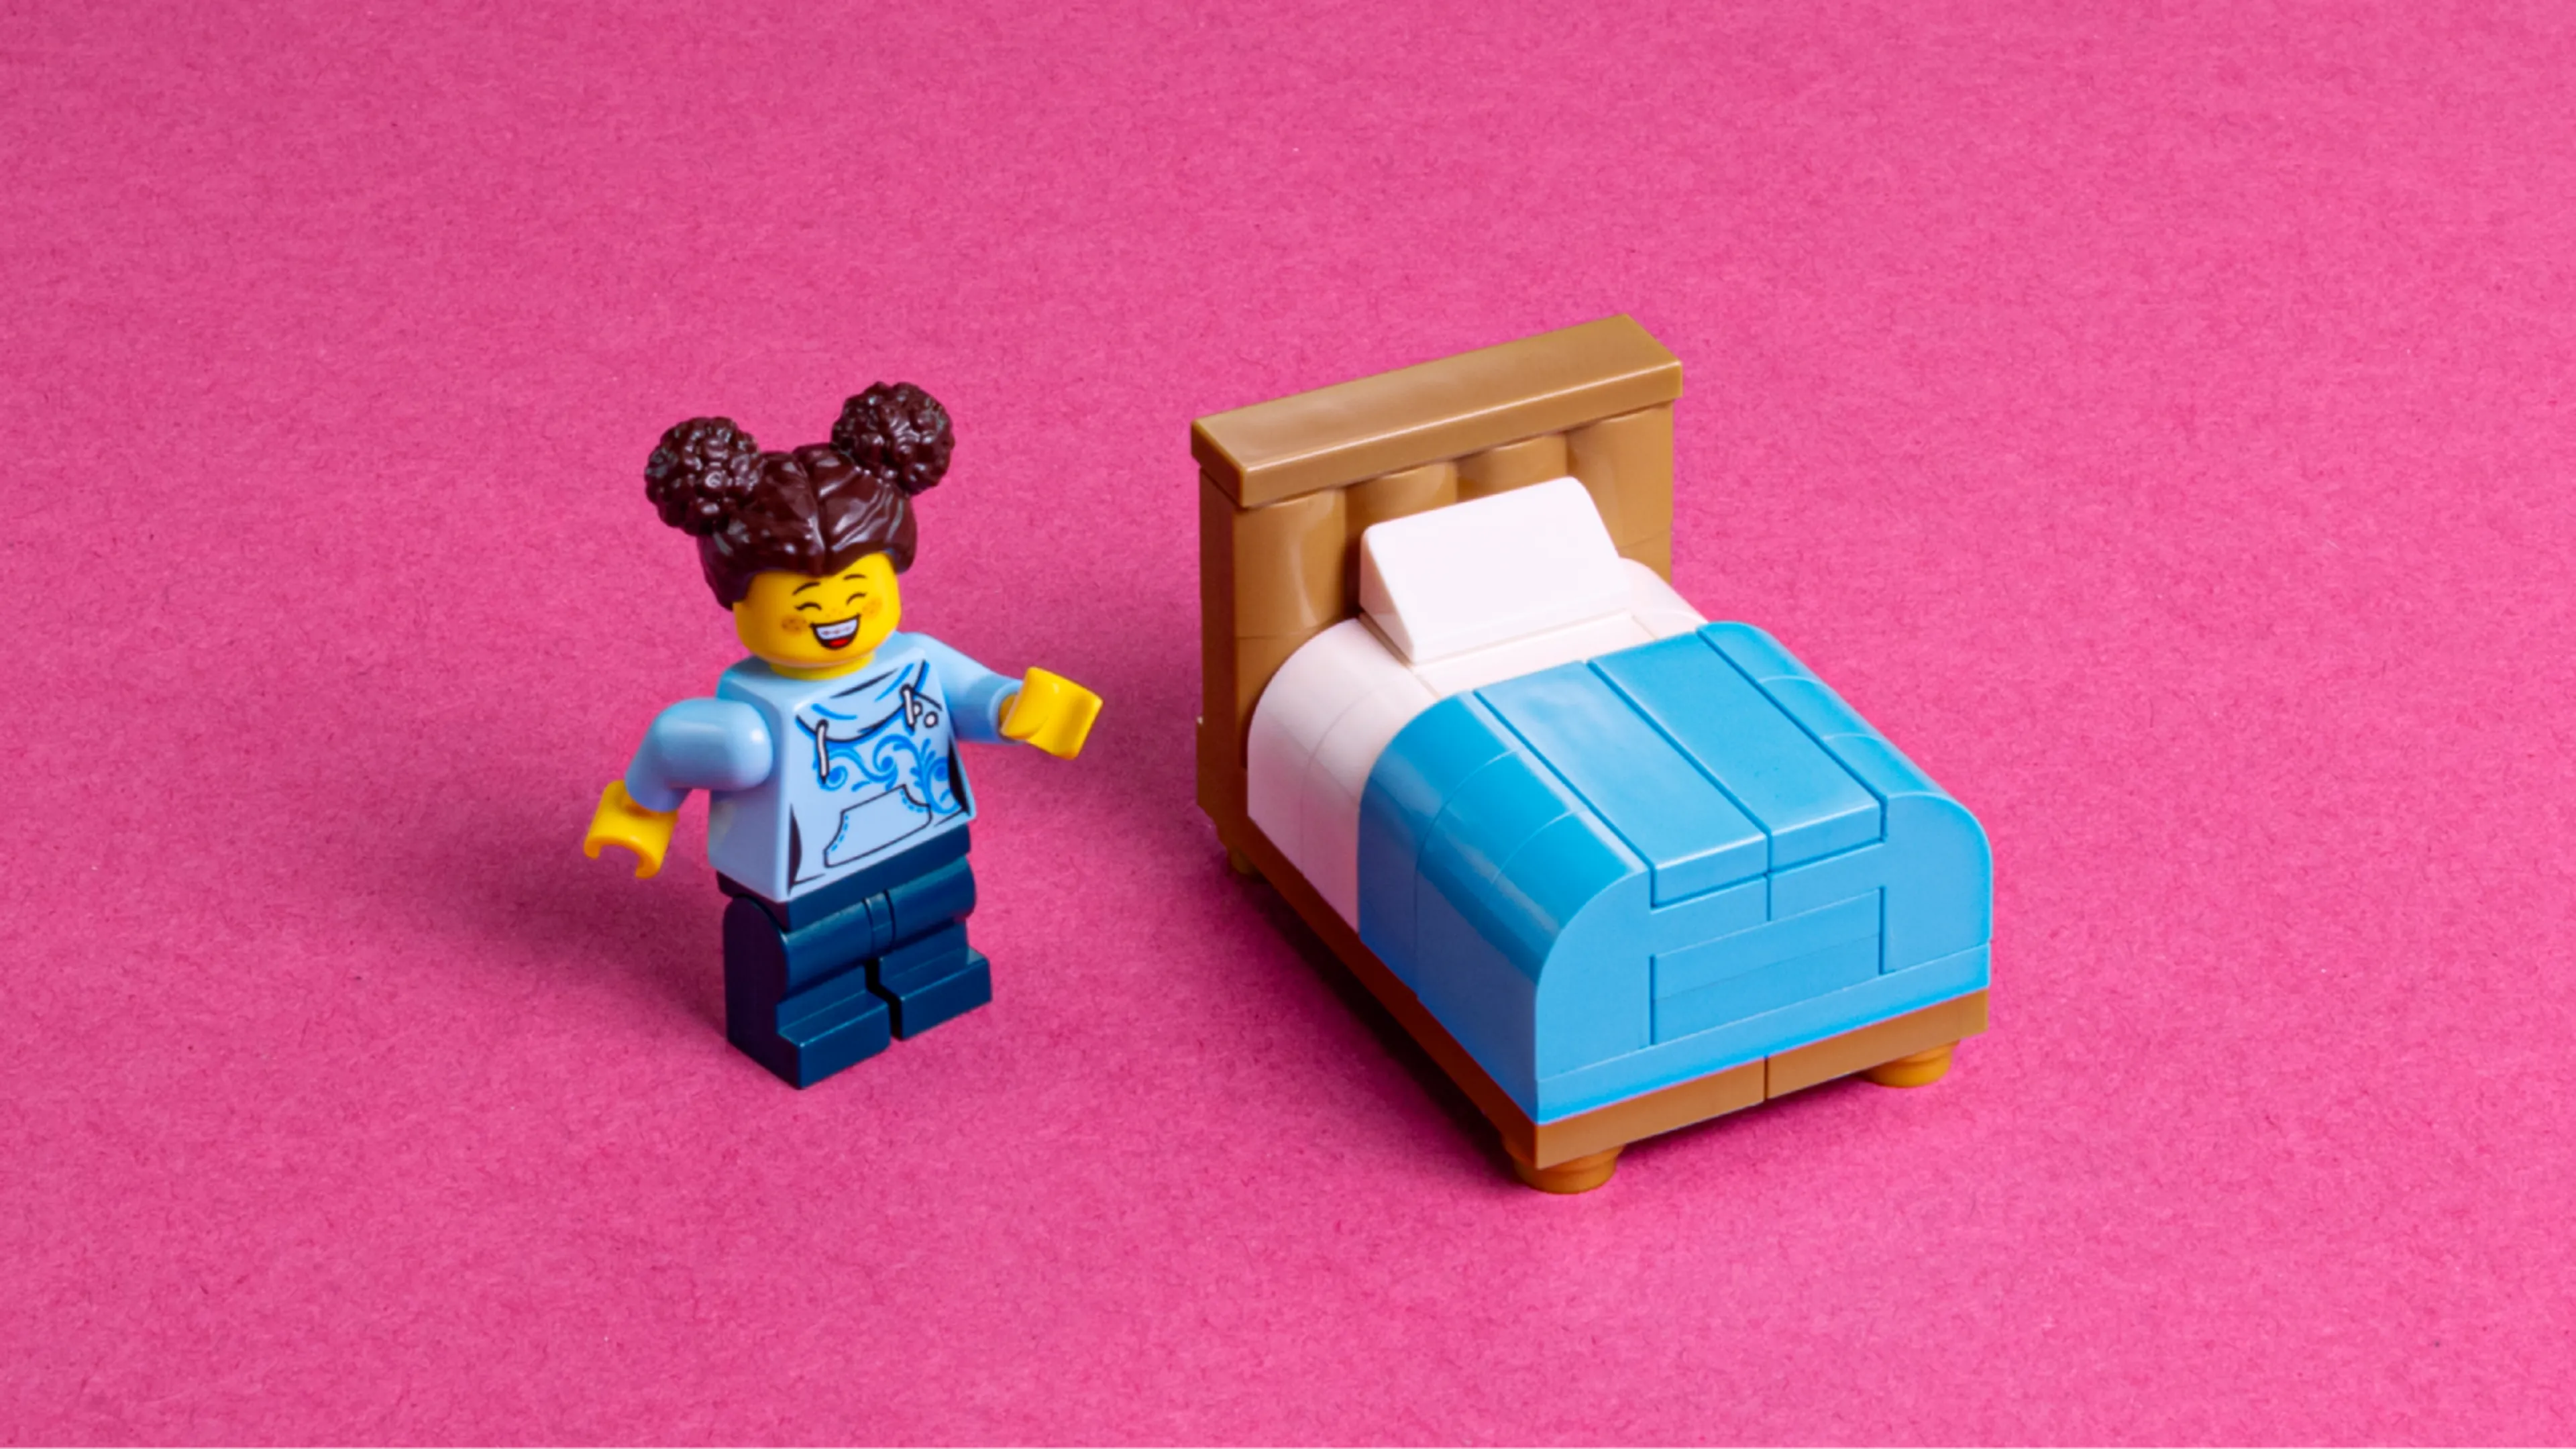 A minifigure and a LEGO bed